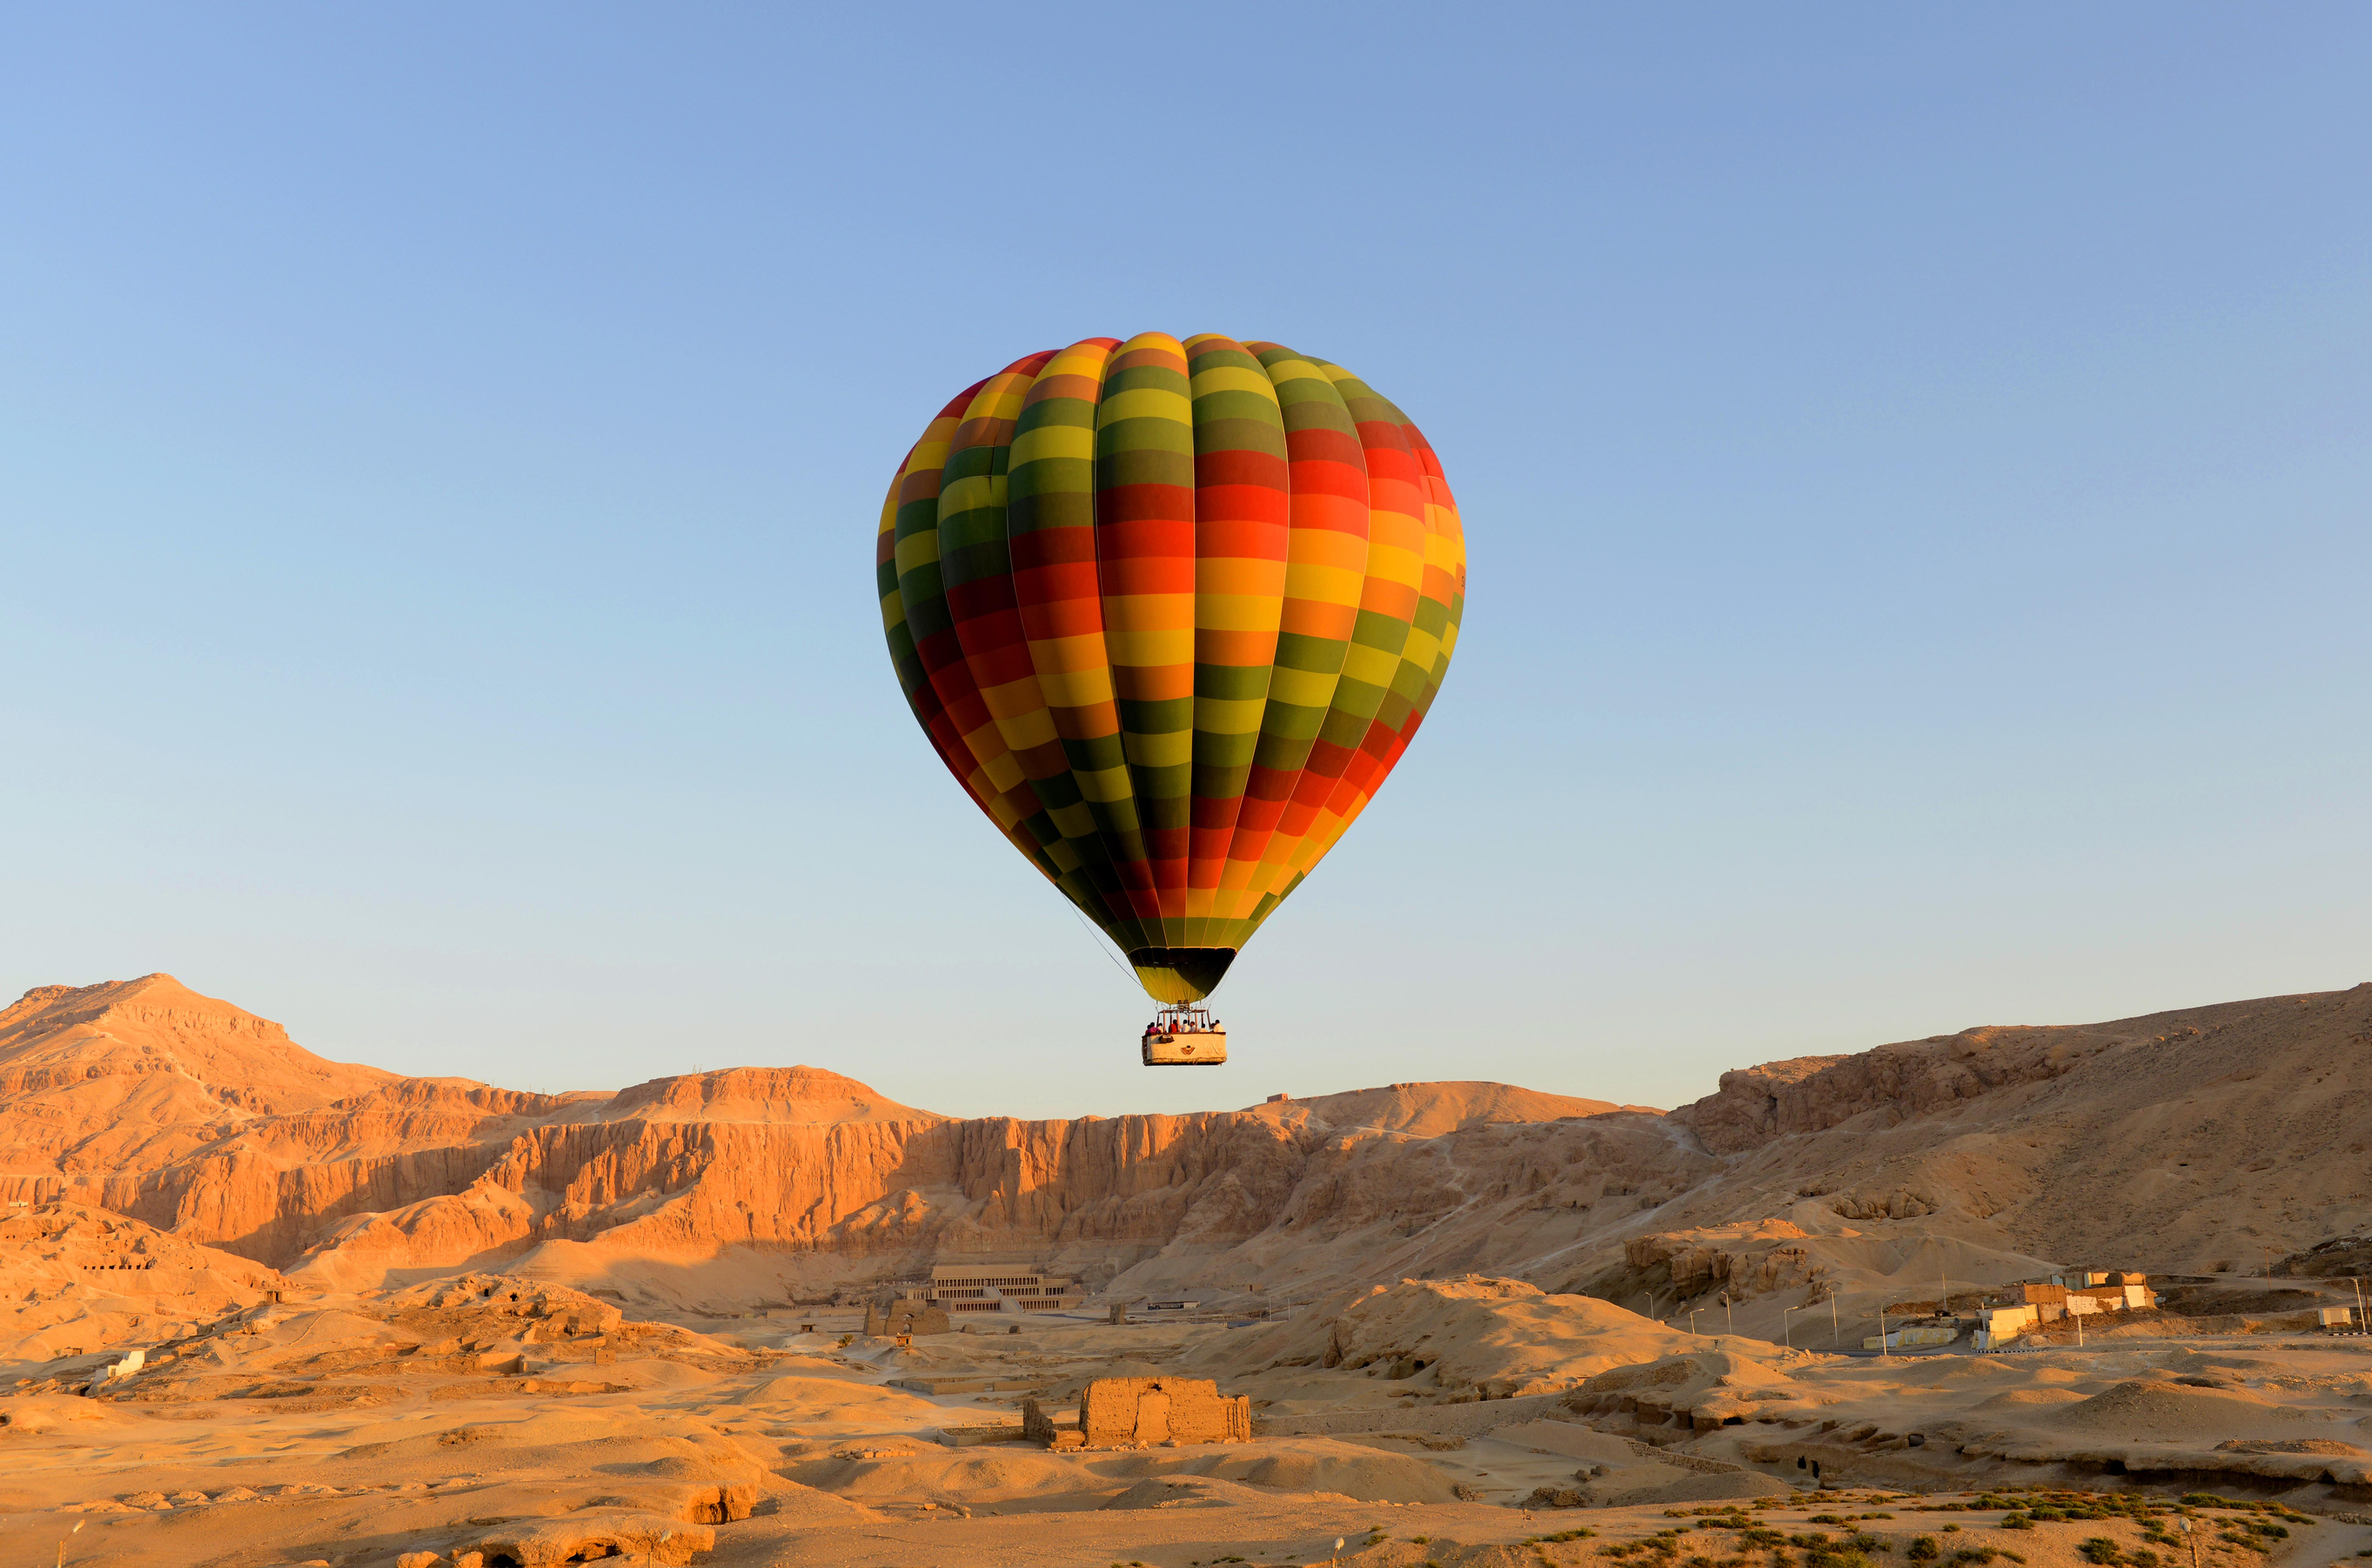 Hot air balloon lifting off in Egypt.